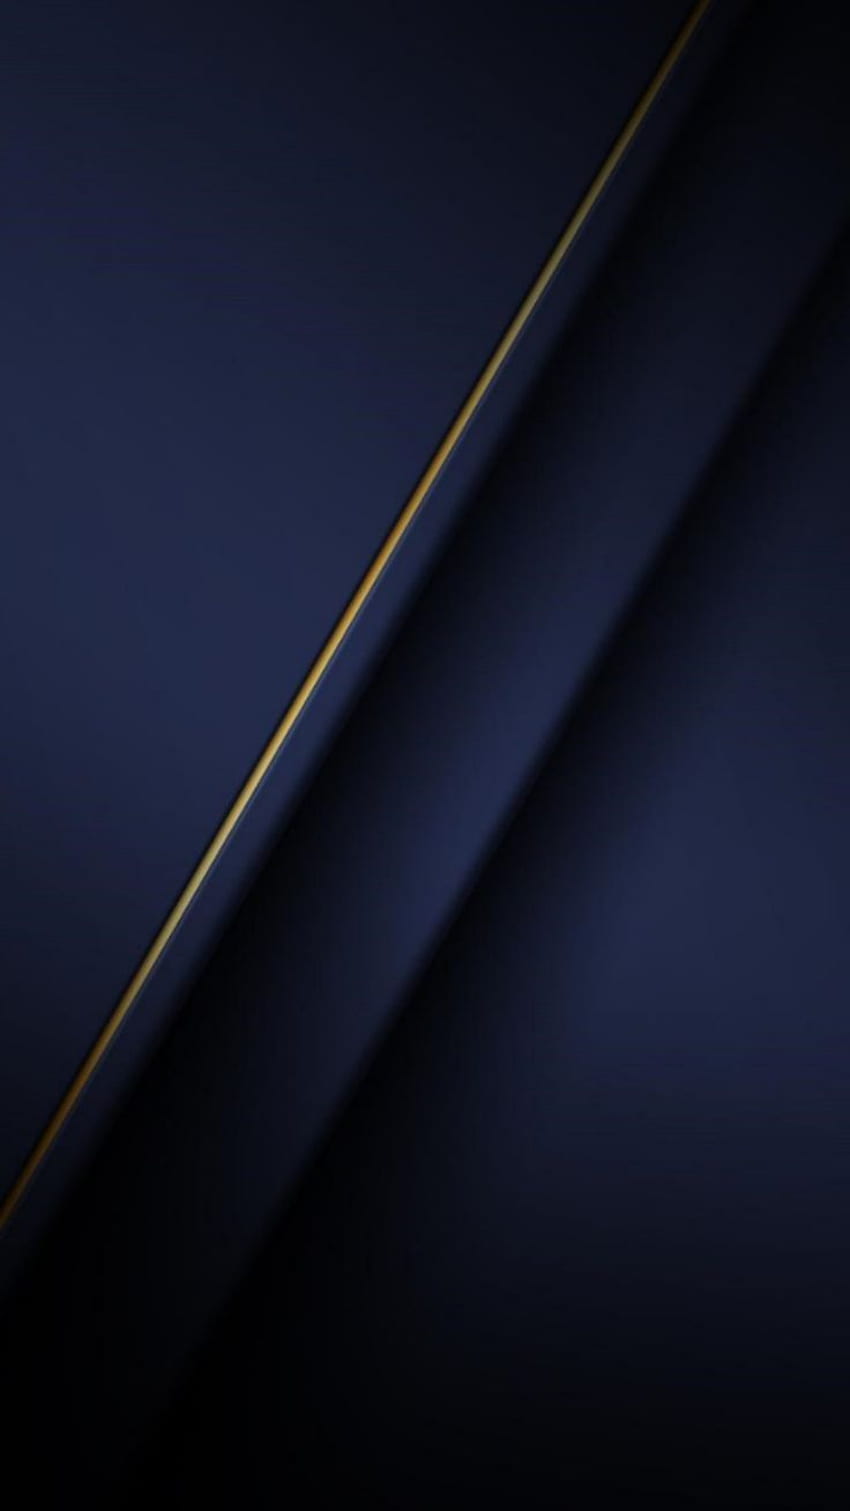 Dark Gold - Phone . Android blue, Gold phone, Abstract HD phone wallpaper